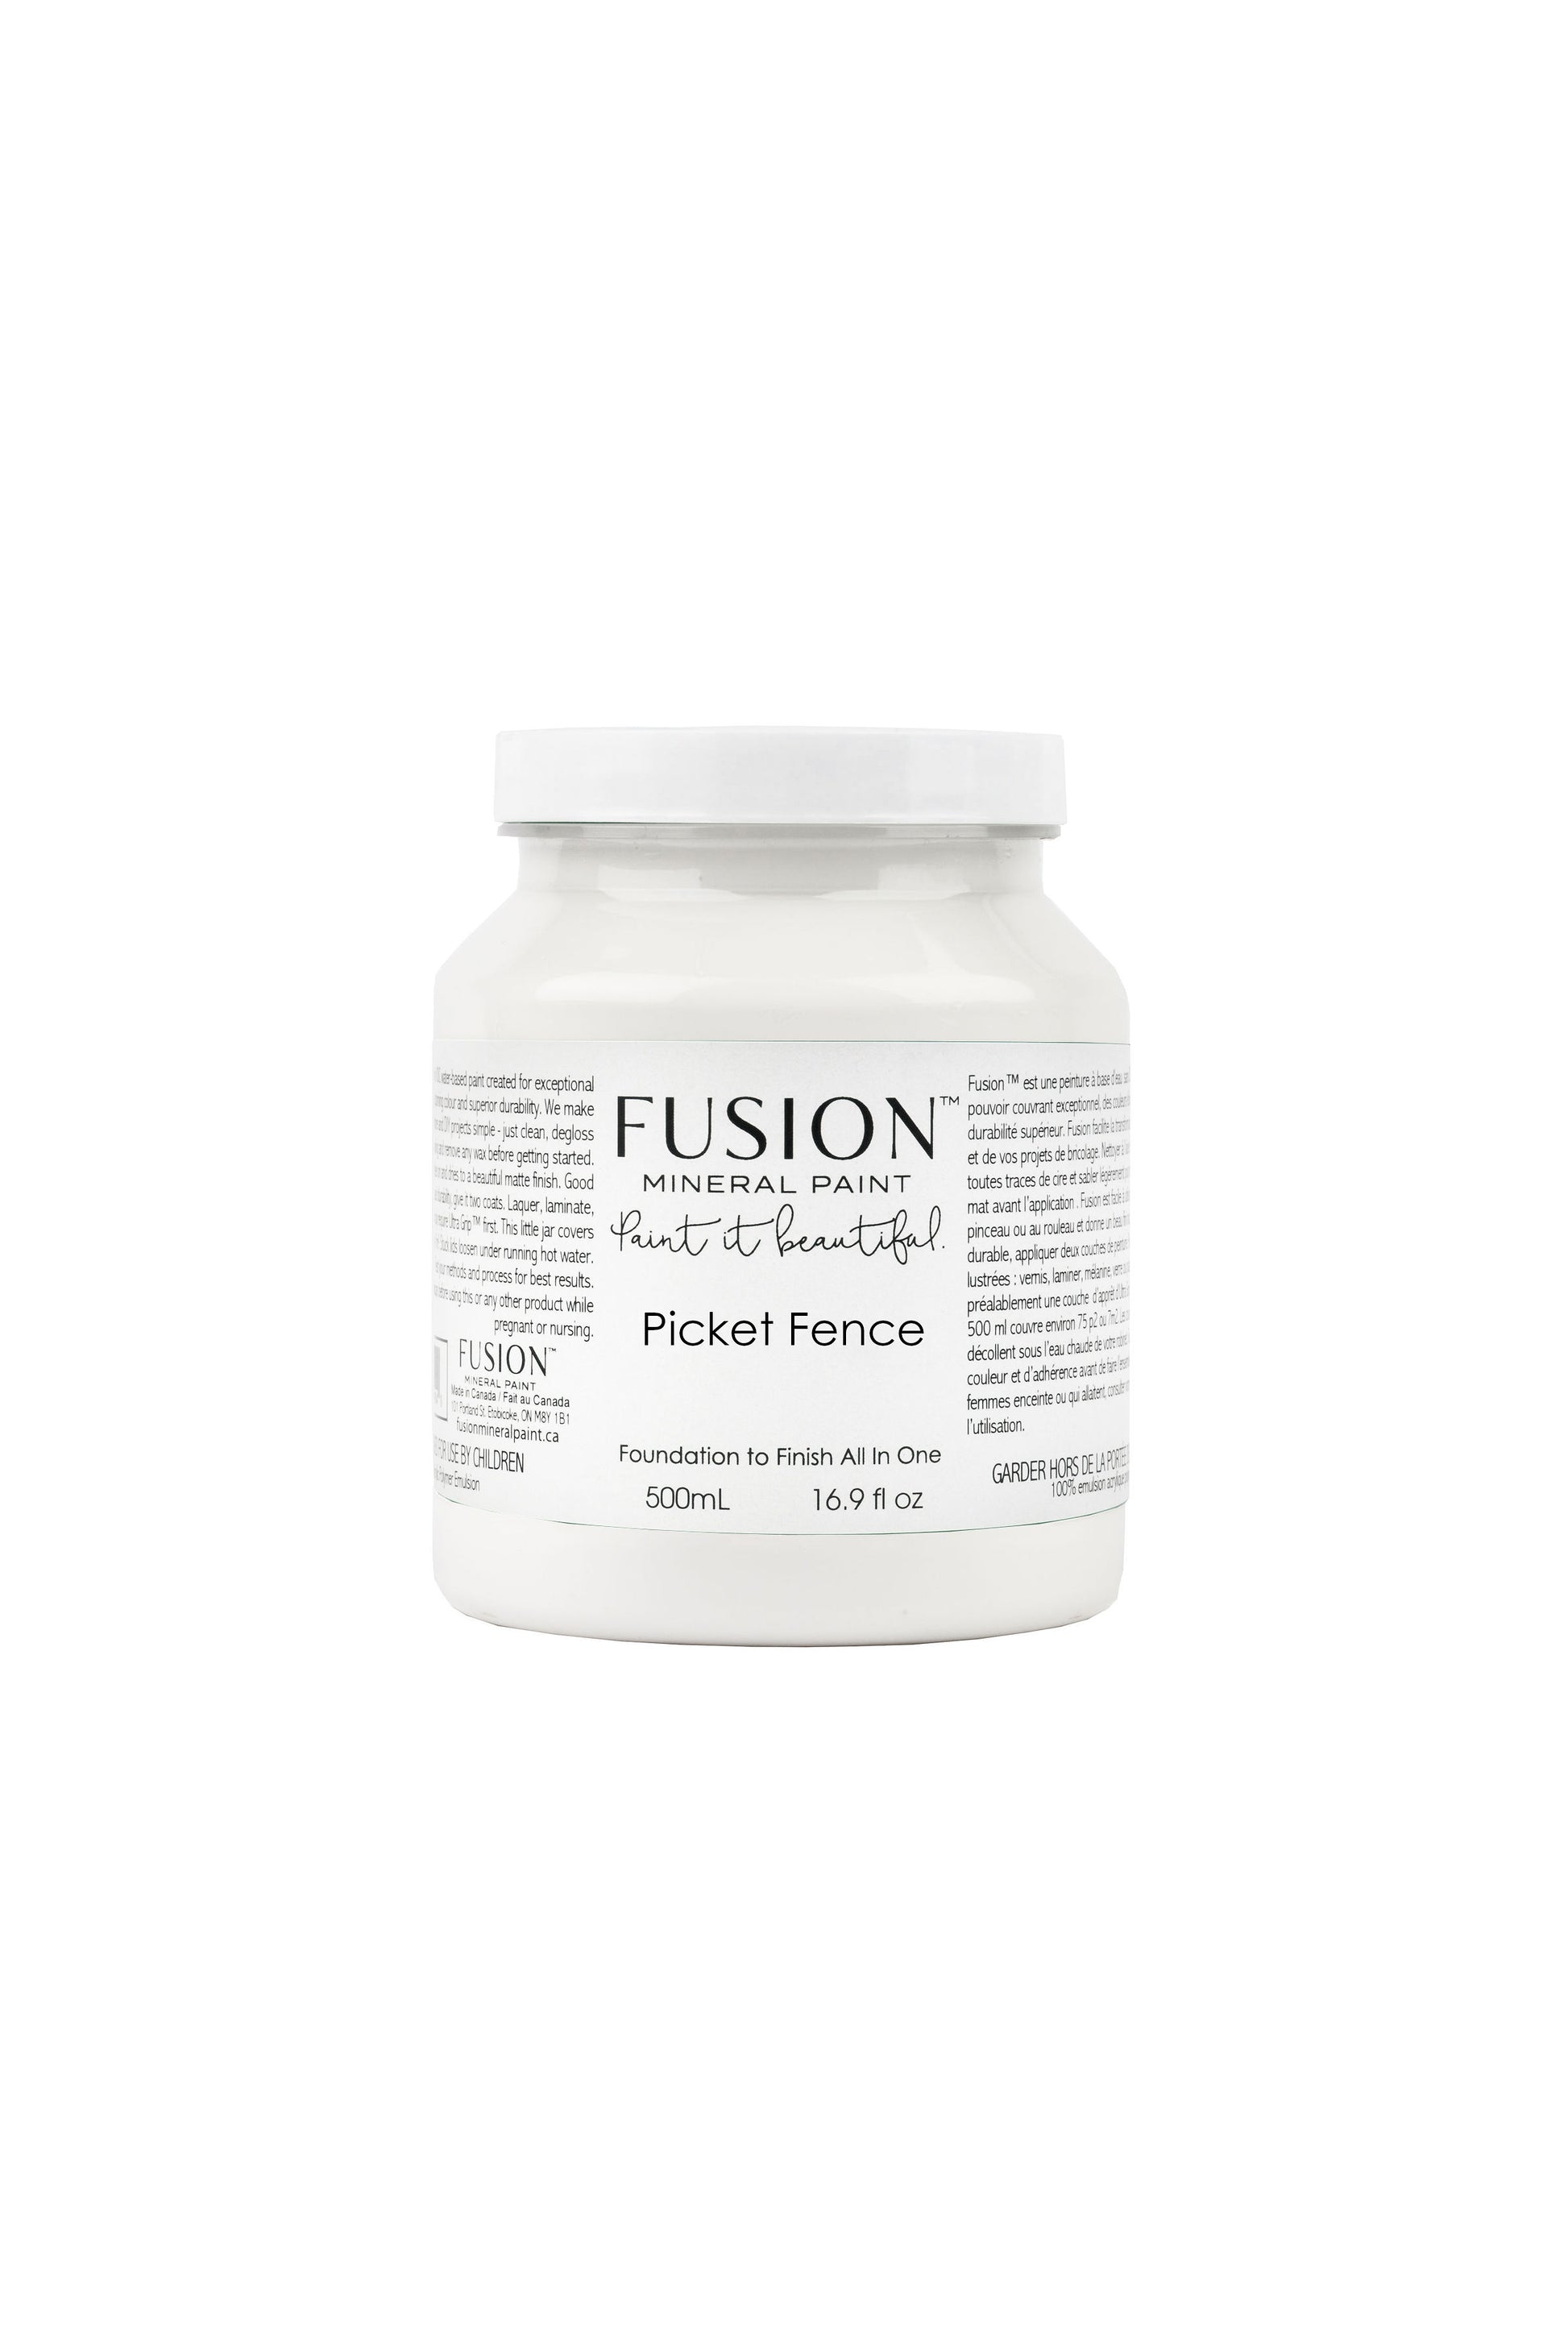 Picket Fence Fusion Mineral Paint, Bright Pure White Paint Color| 500ml Pint Size